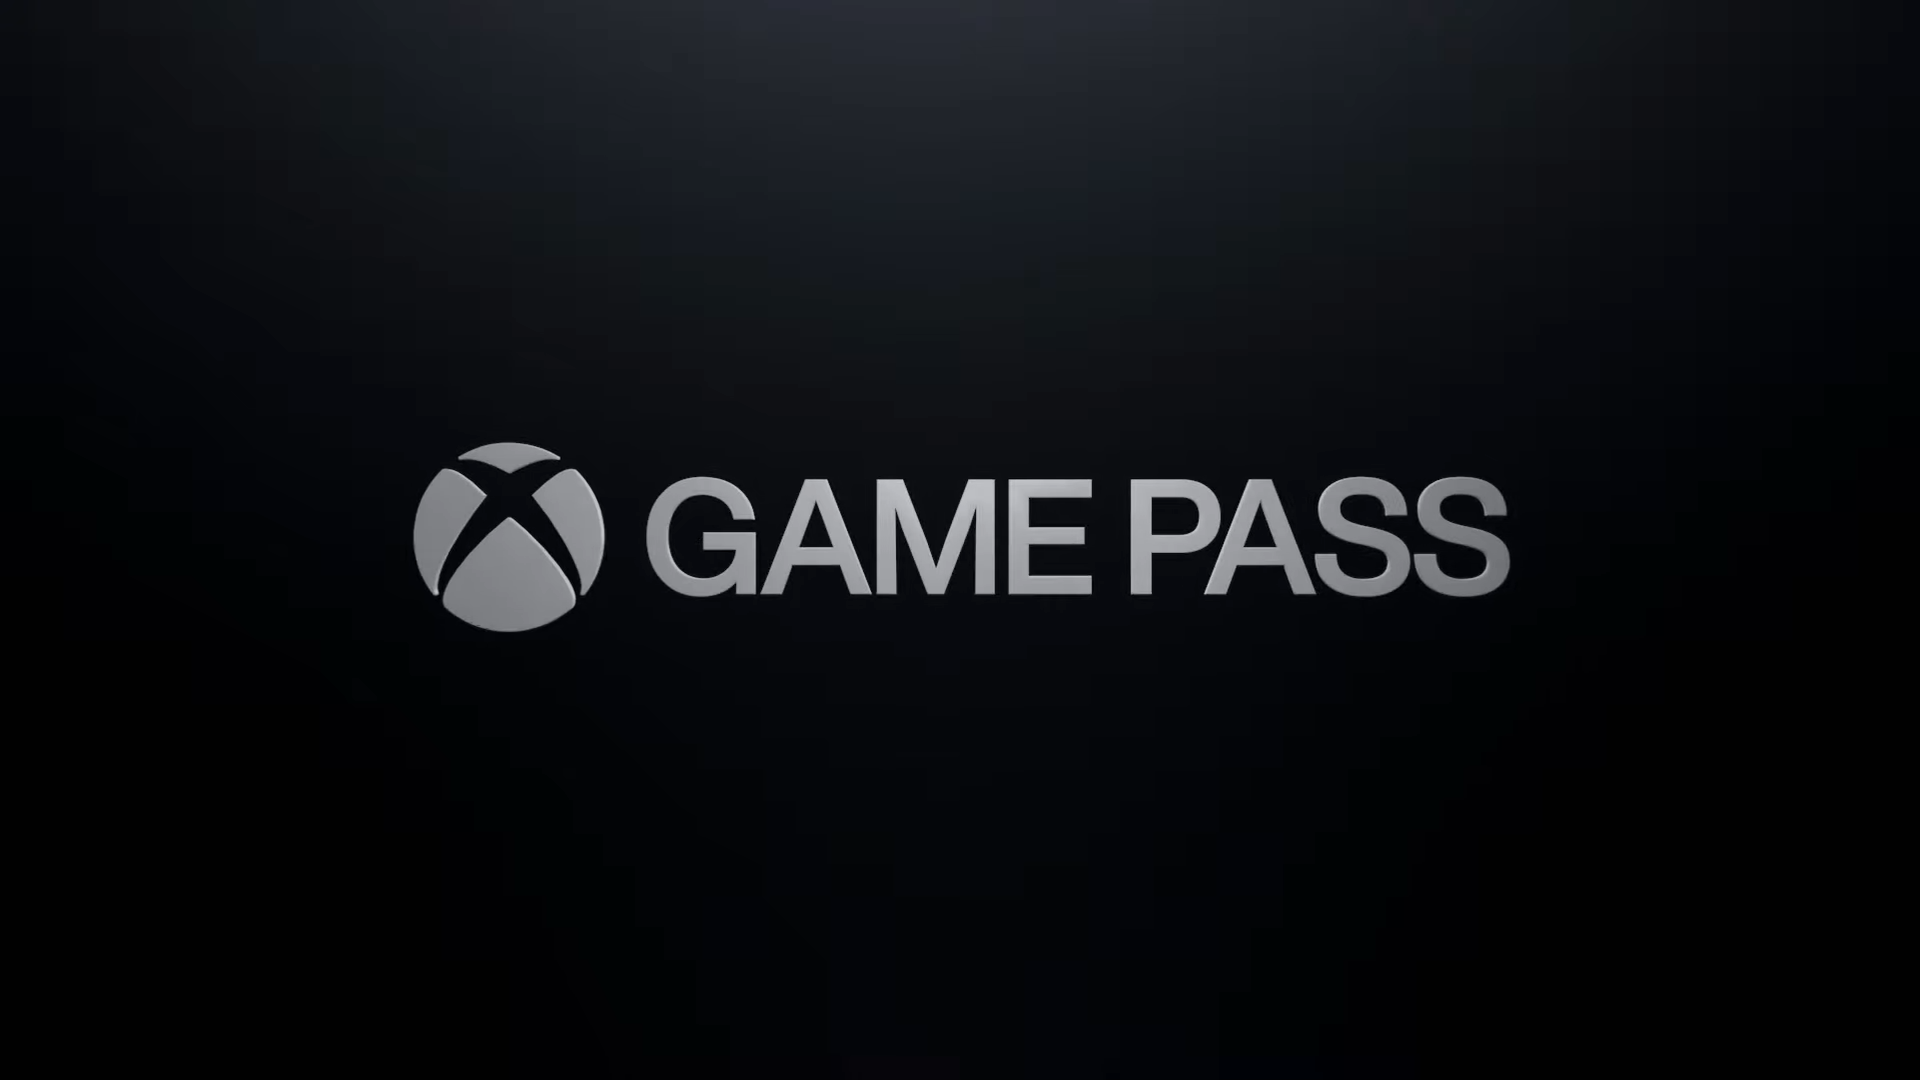 Xbox Game Pass is keeping the Xbox name despite its new logo